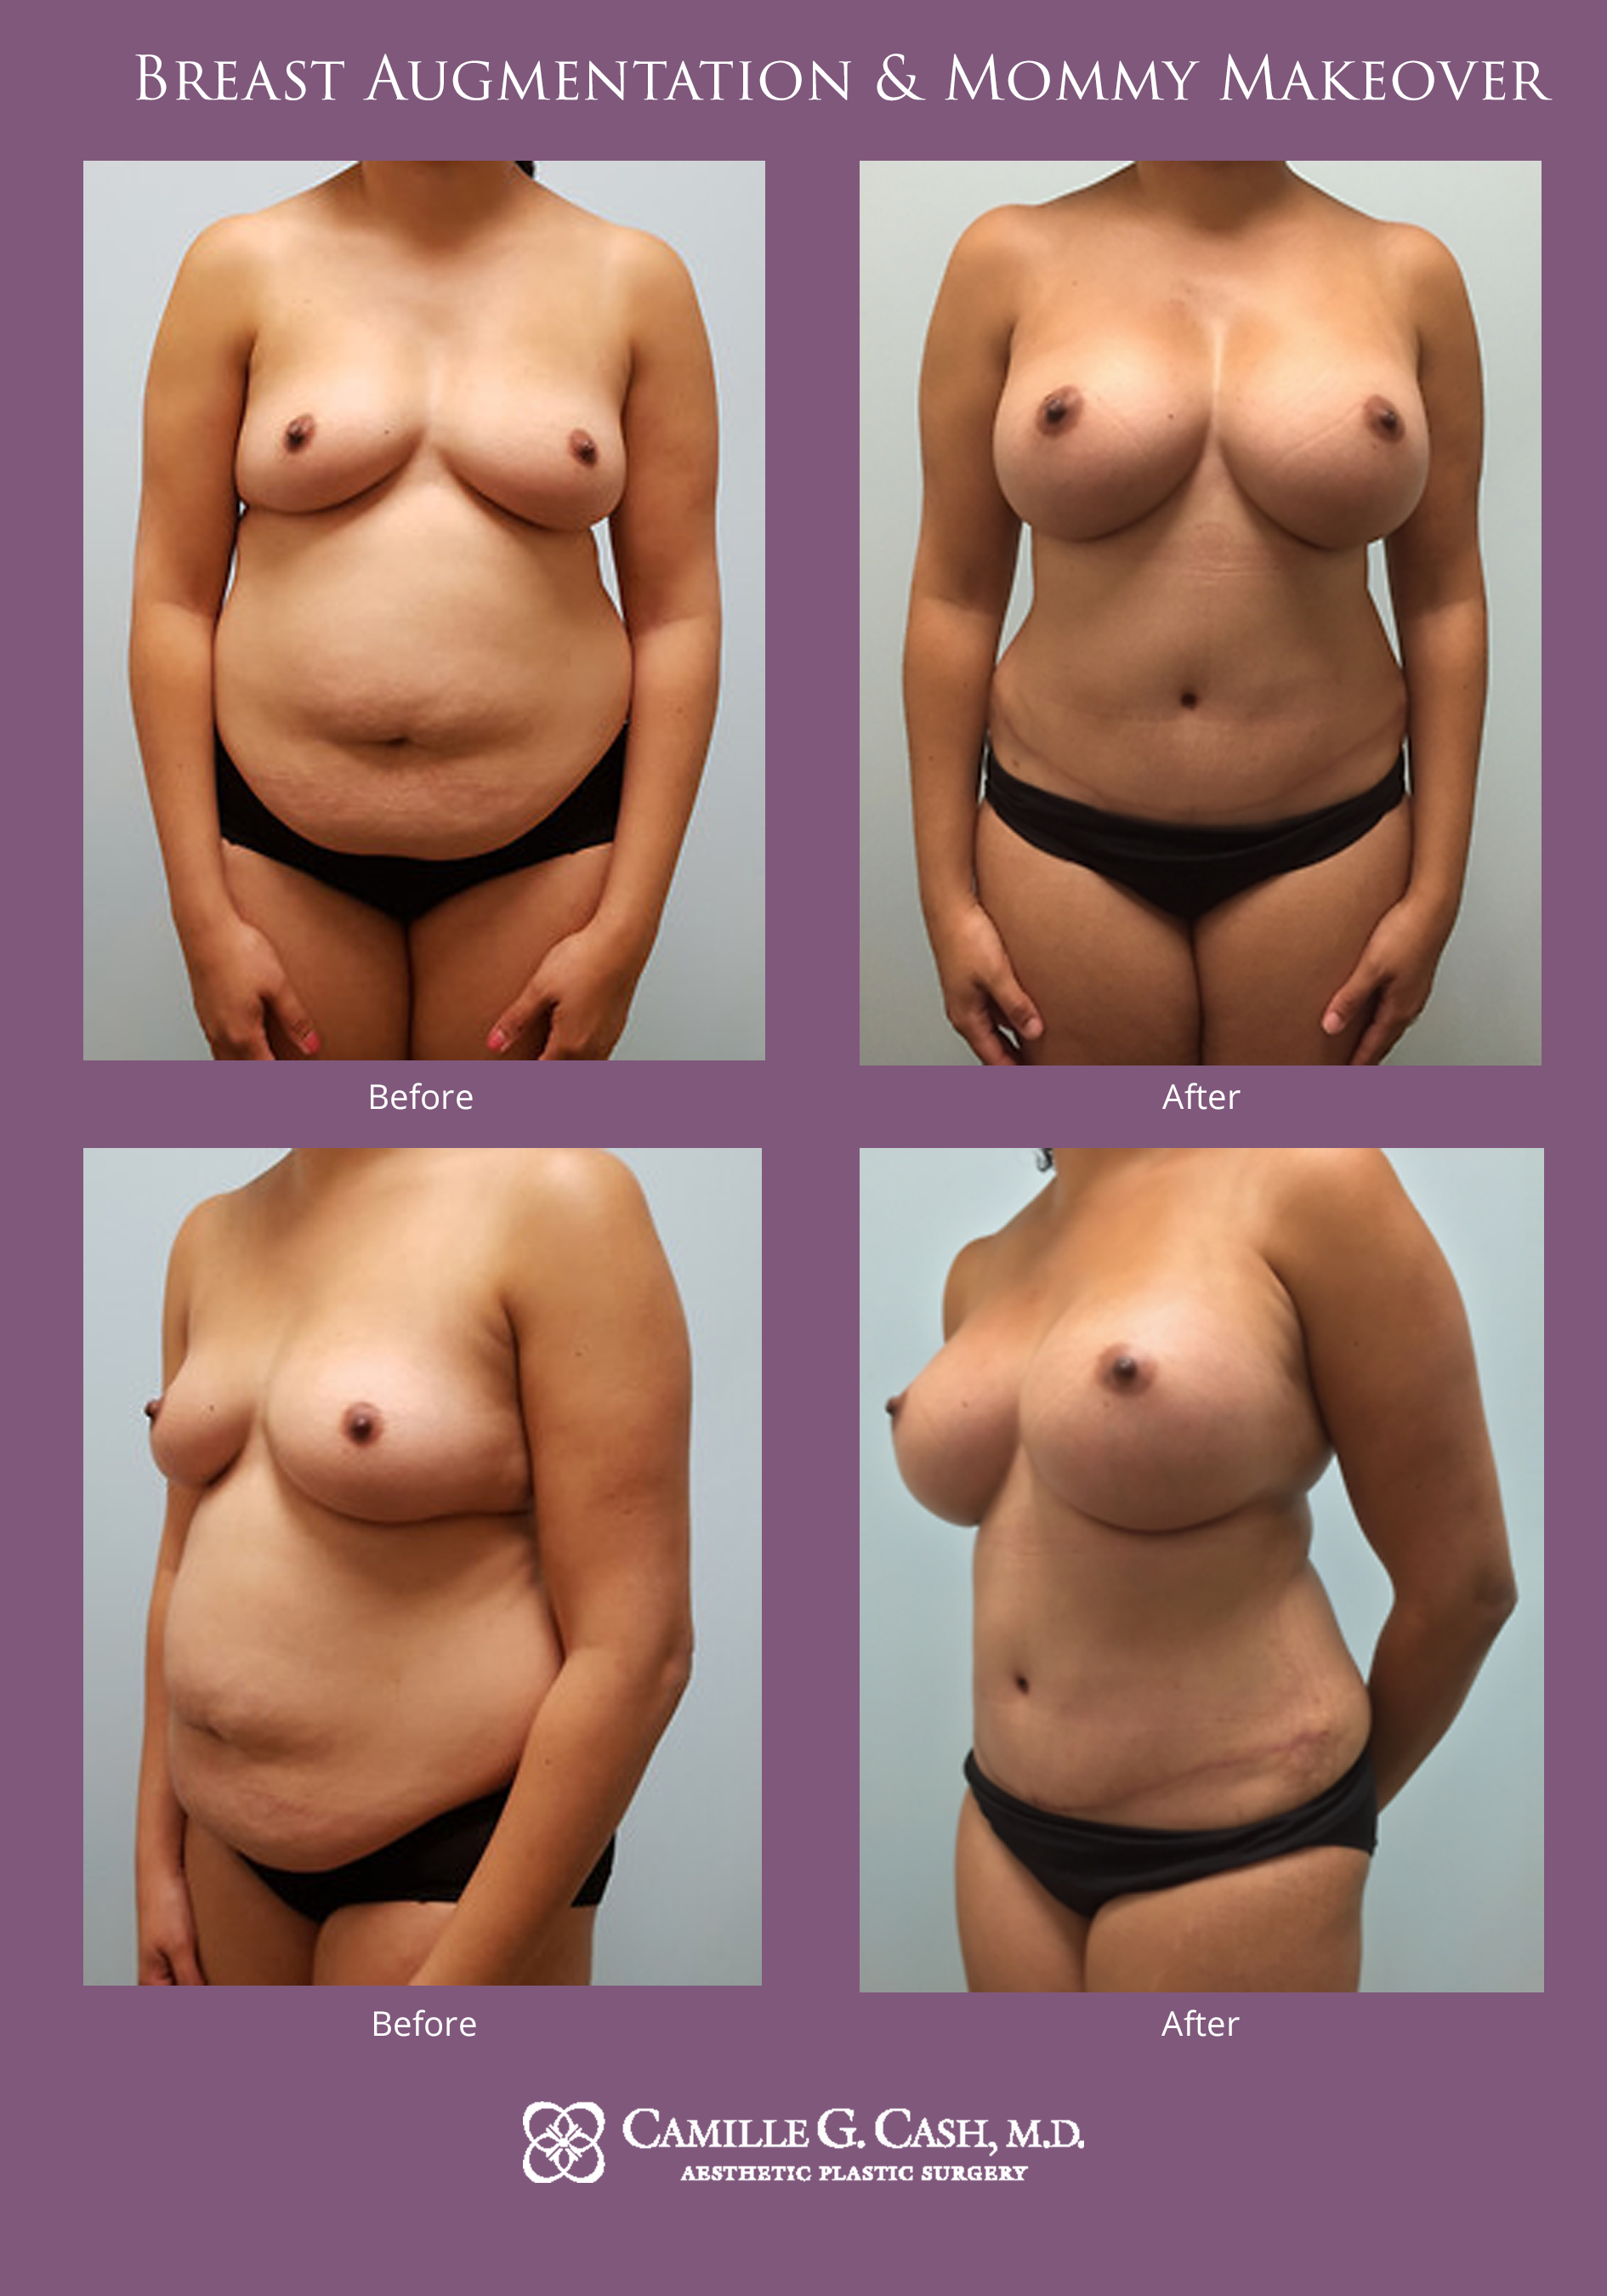 Breast augmentation and mommy makeover before and after photos